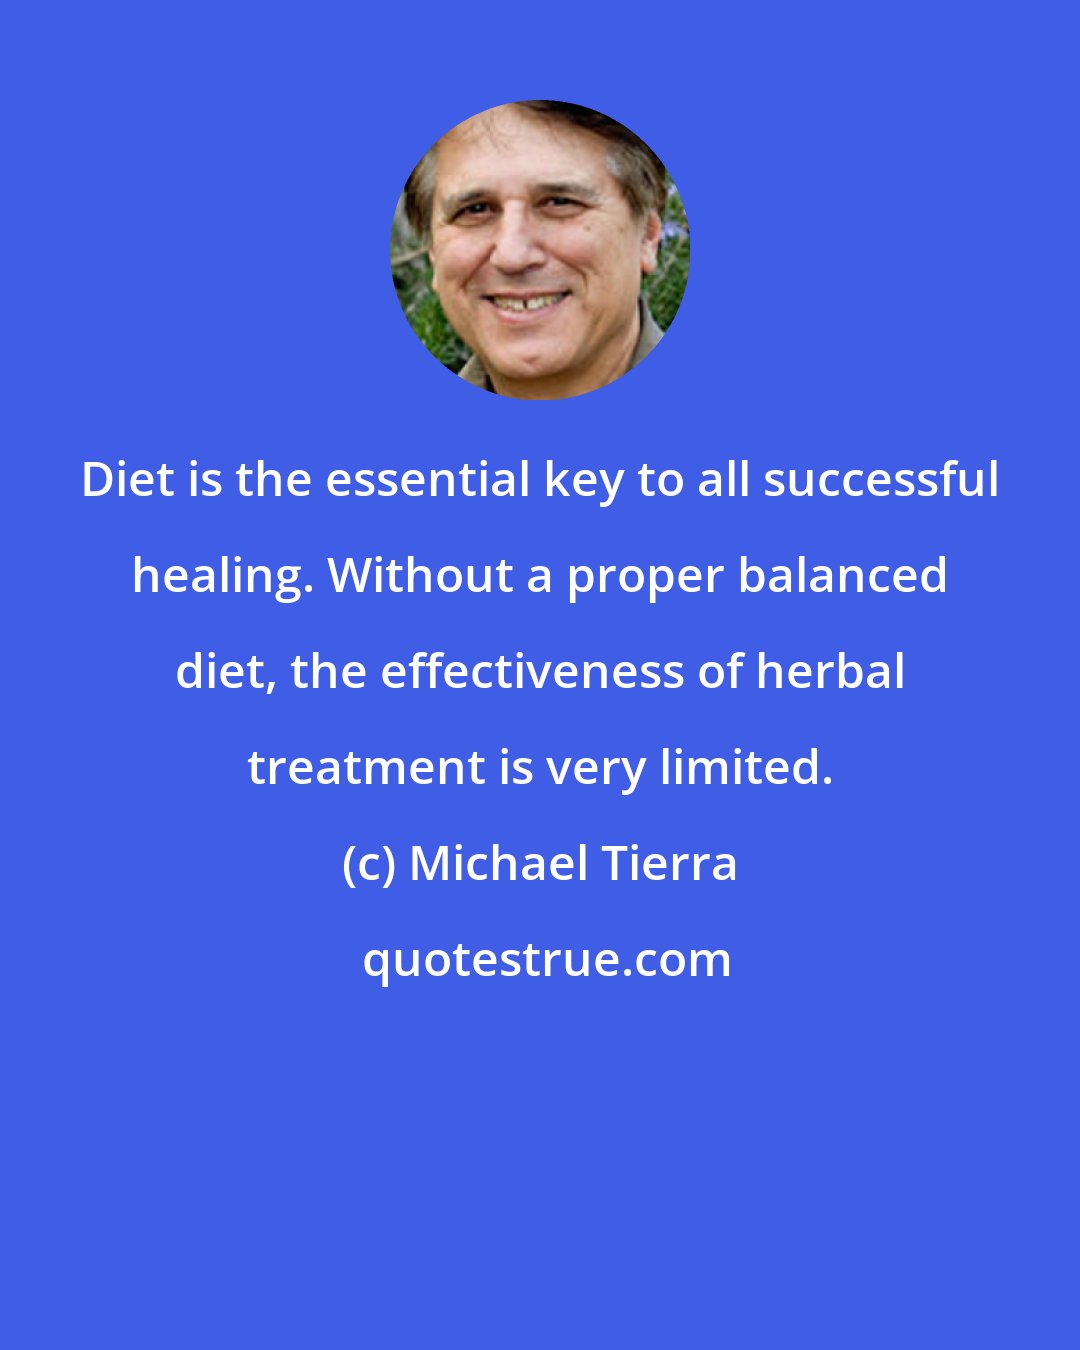 Michael Tierra: Diet is the essential key to all successful healing. Without a proper balanced diet, the effectiveness of herbal treatment is very limited.